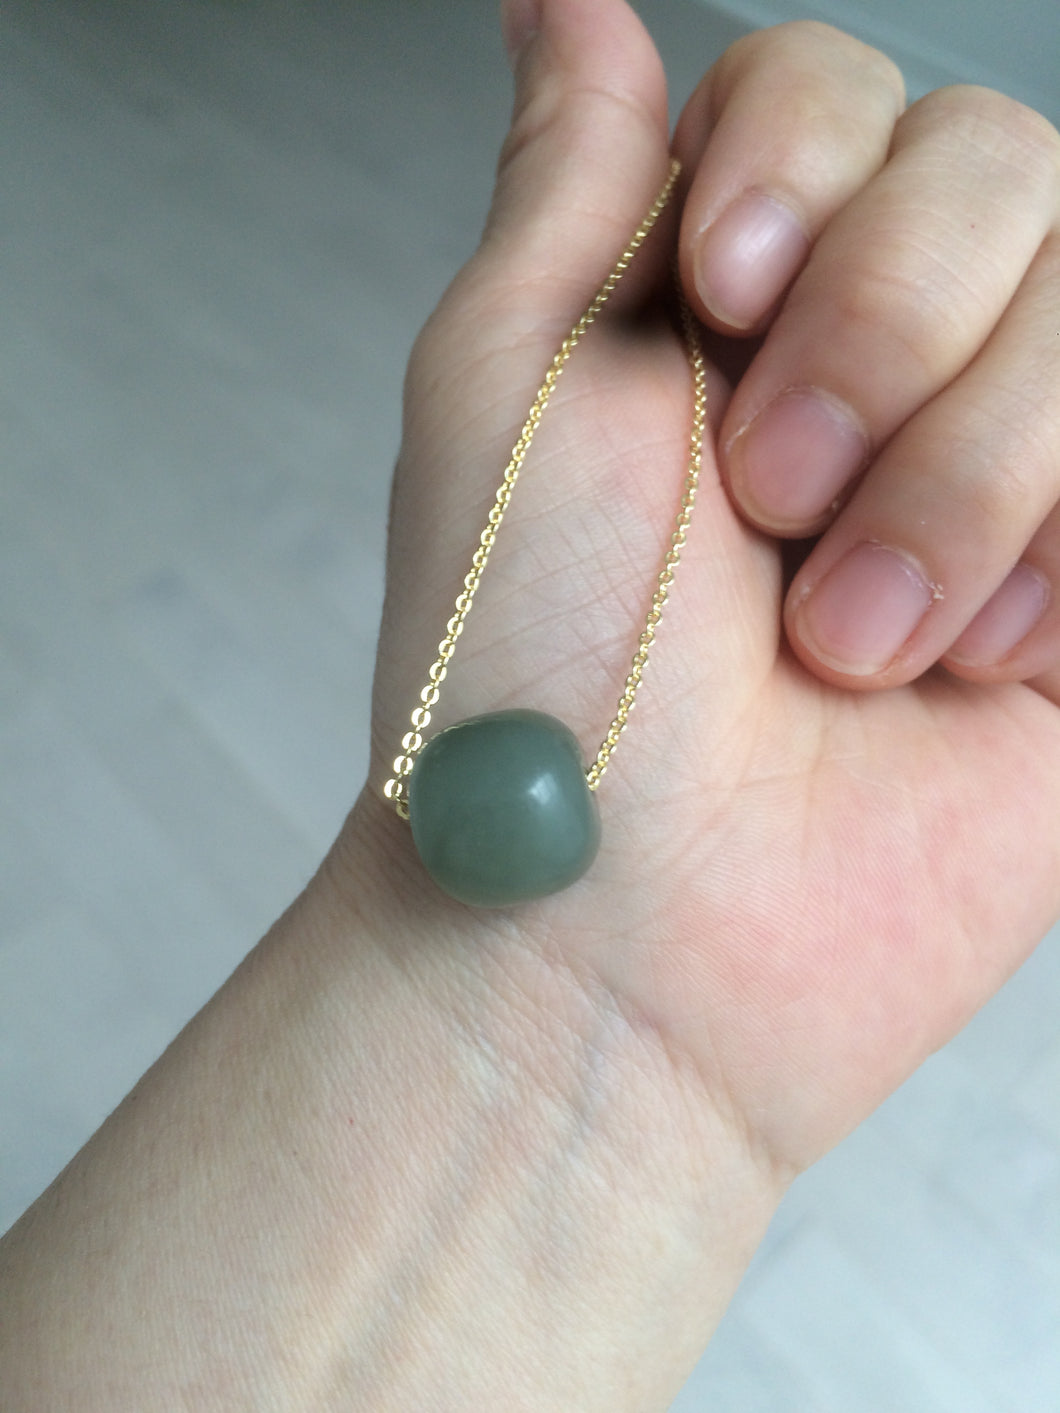 12.7x13.6mm Type A 100% Natural dark green/blue/gray nephrite hetian Jade vintage style bead pendant necklace HT47